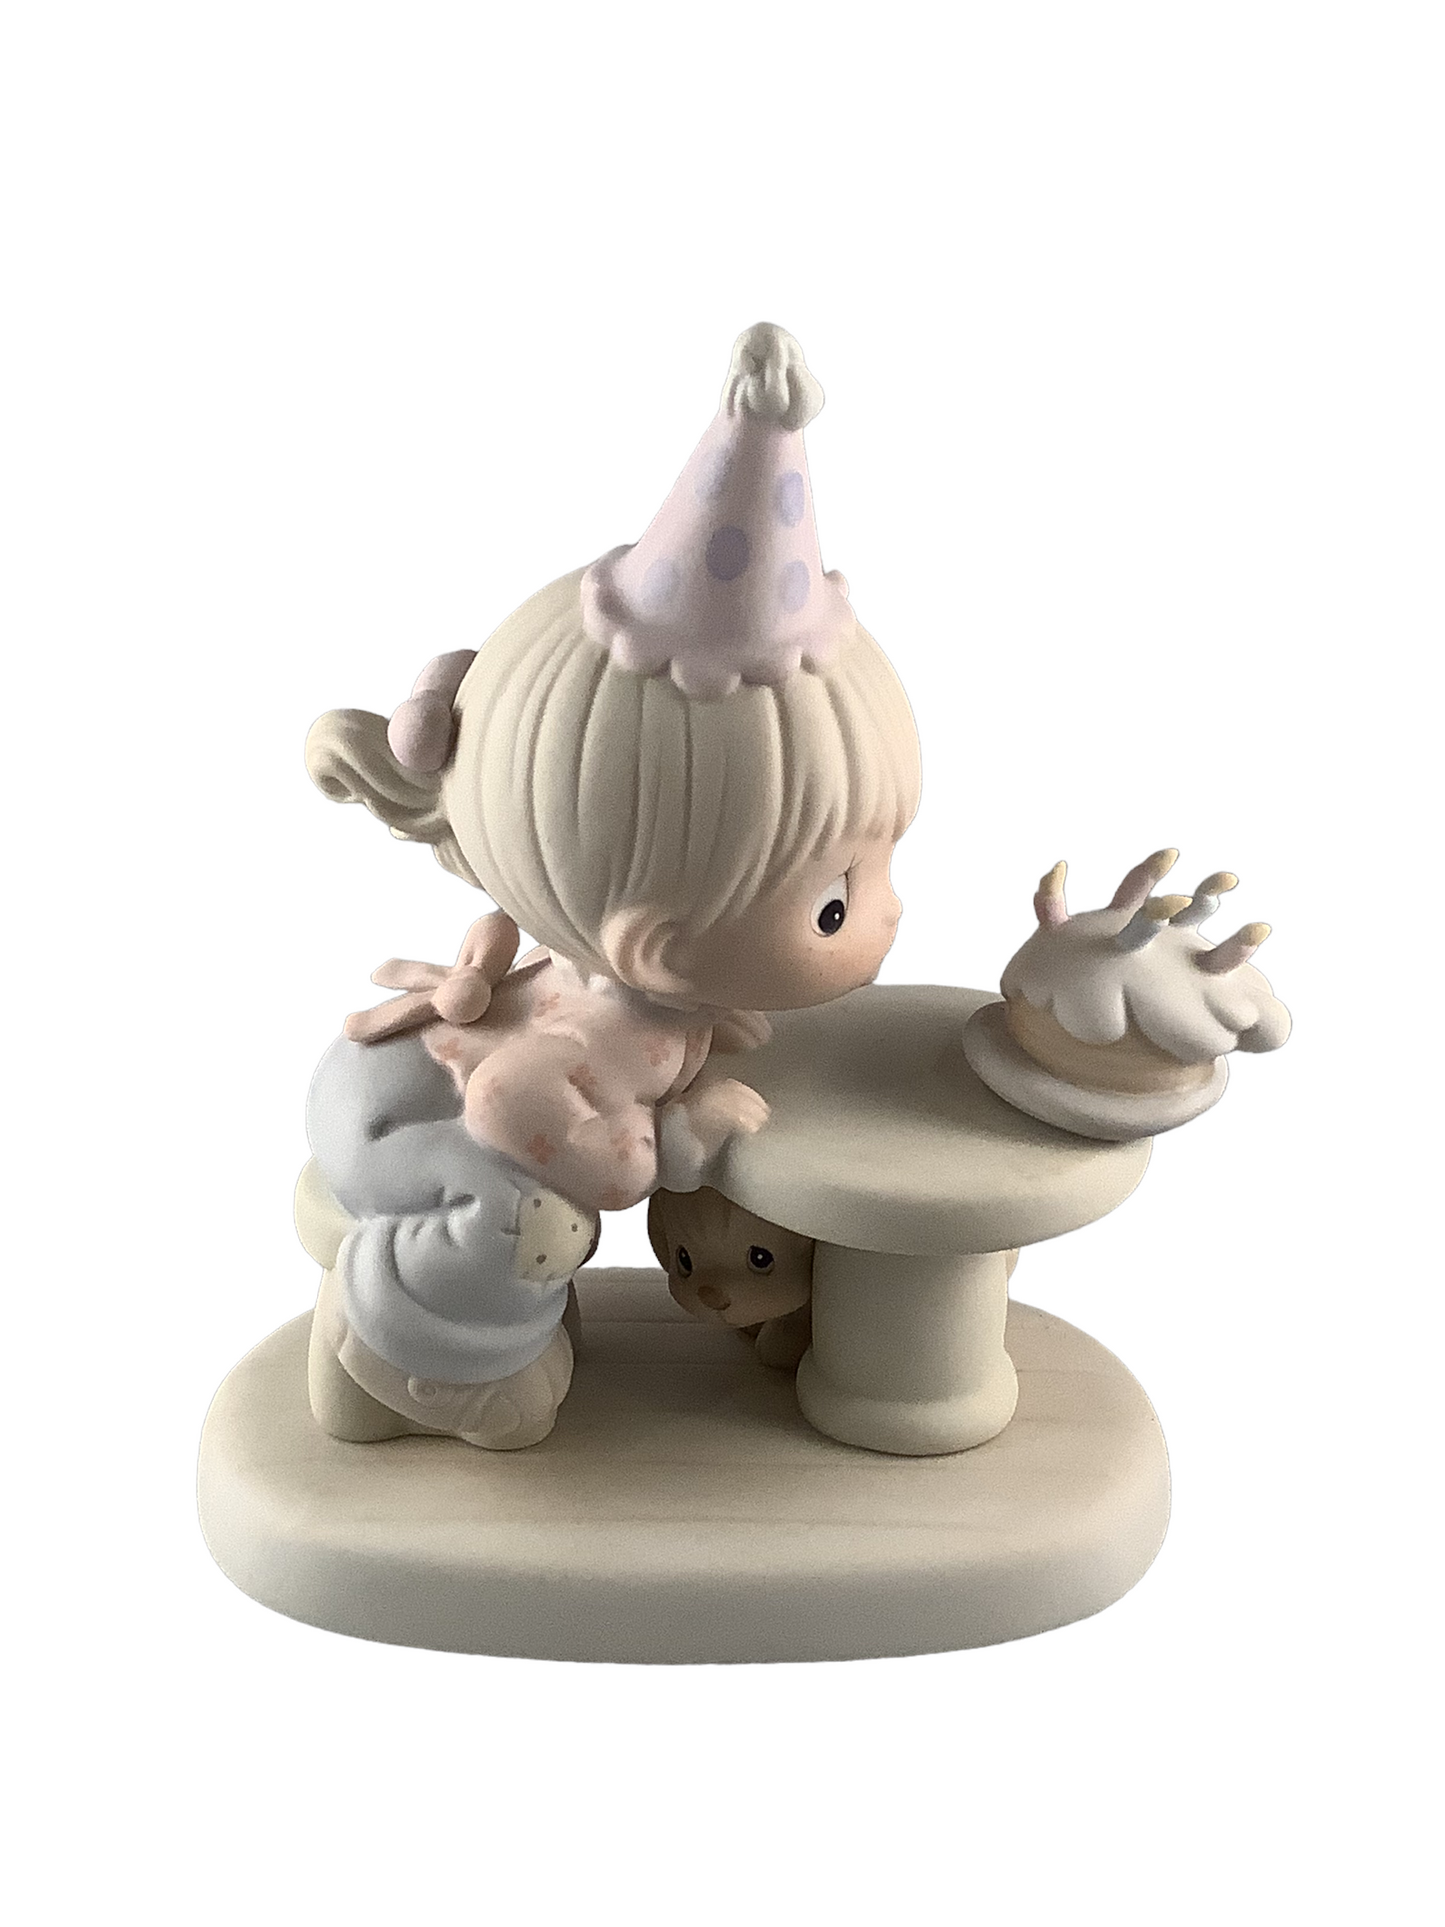 May Your Every Wish Come True - Precious Moment Figurine